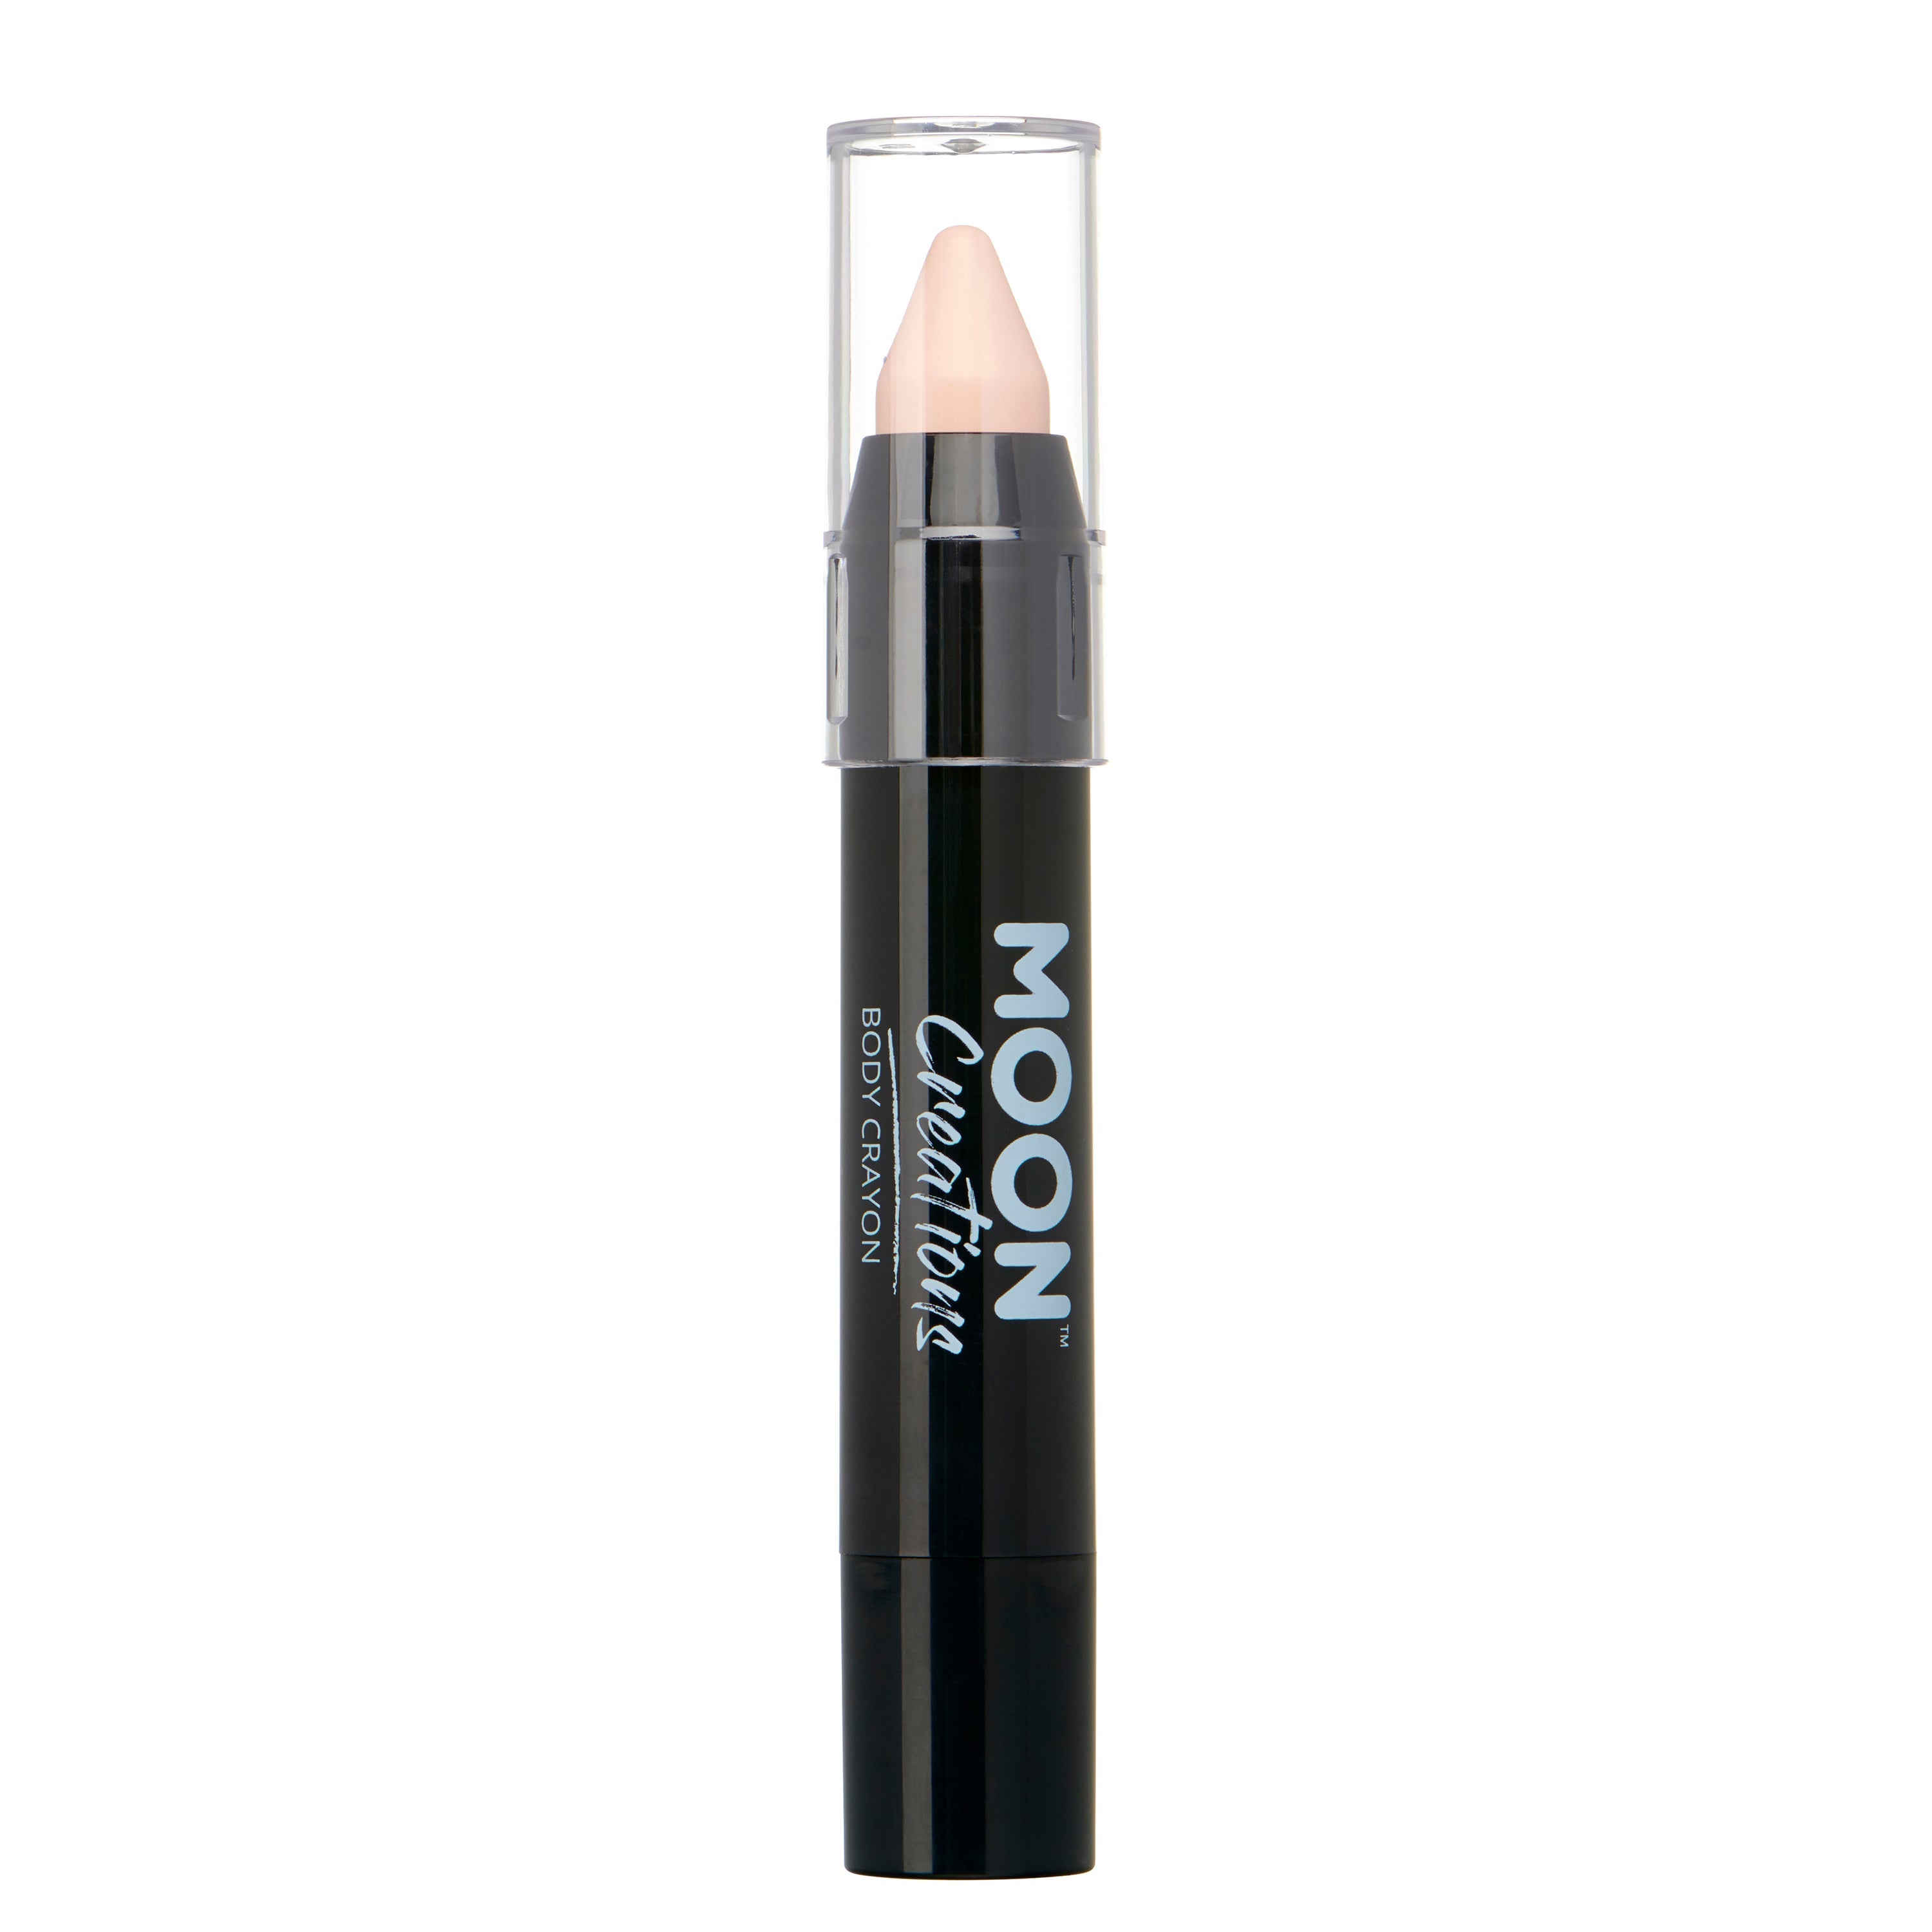 Pale Skin - Face & Body Crayon, 3.5gL. Cosmetically certified, FDA & Health Canada compliant and cruelty free.